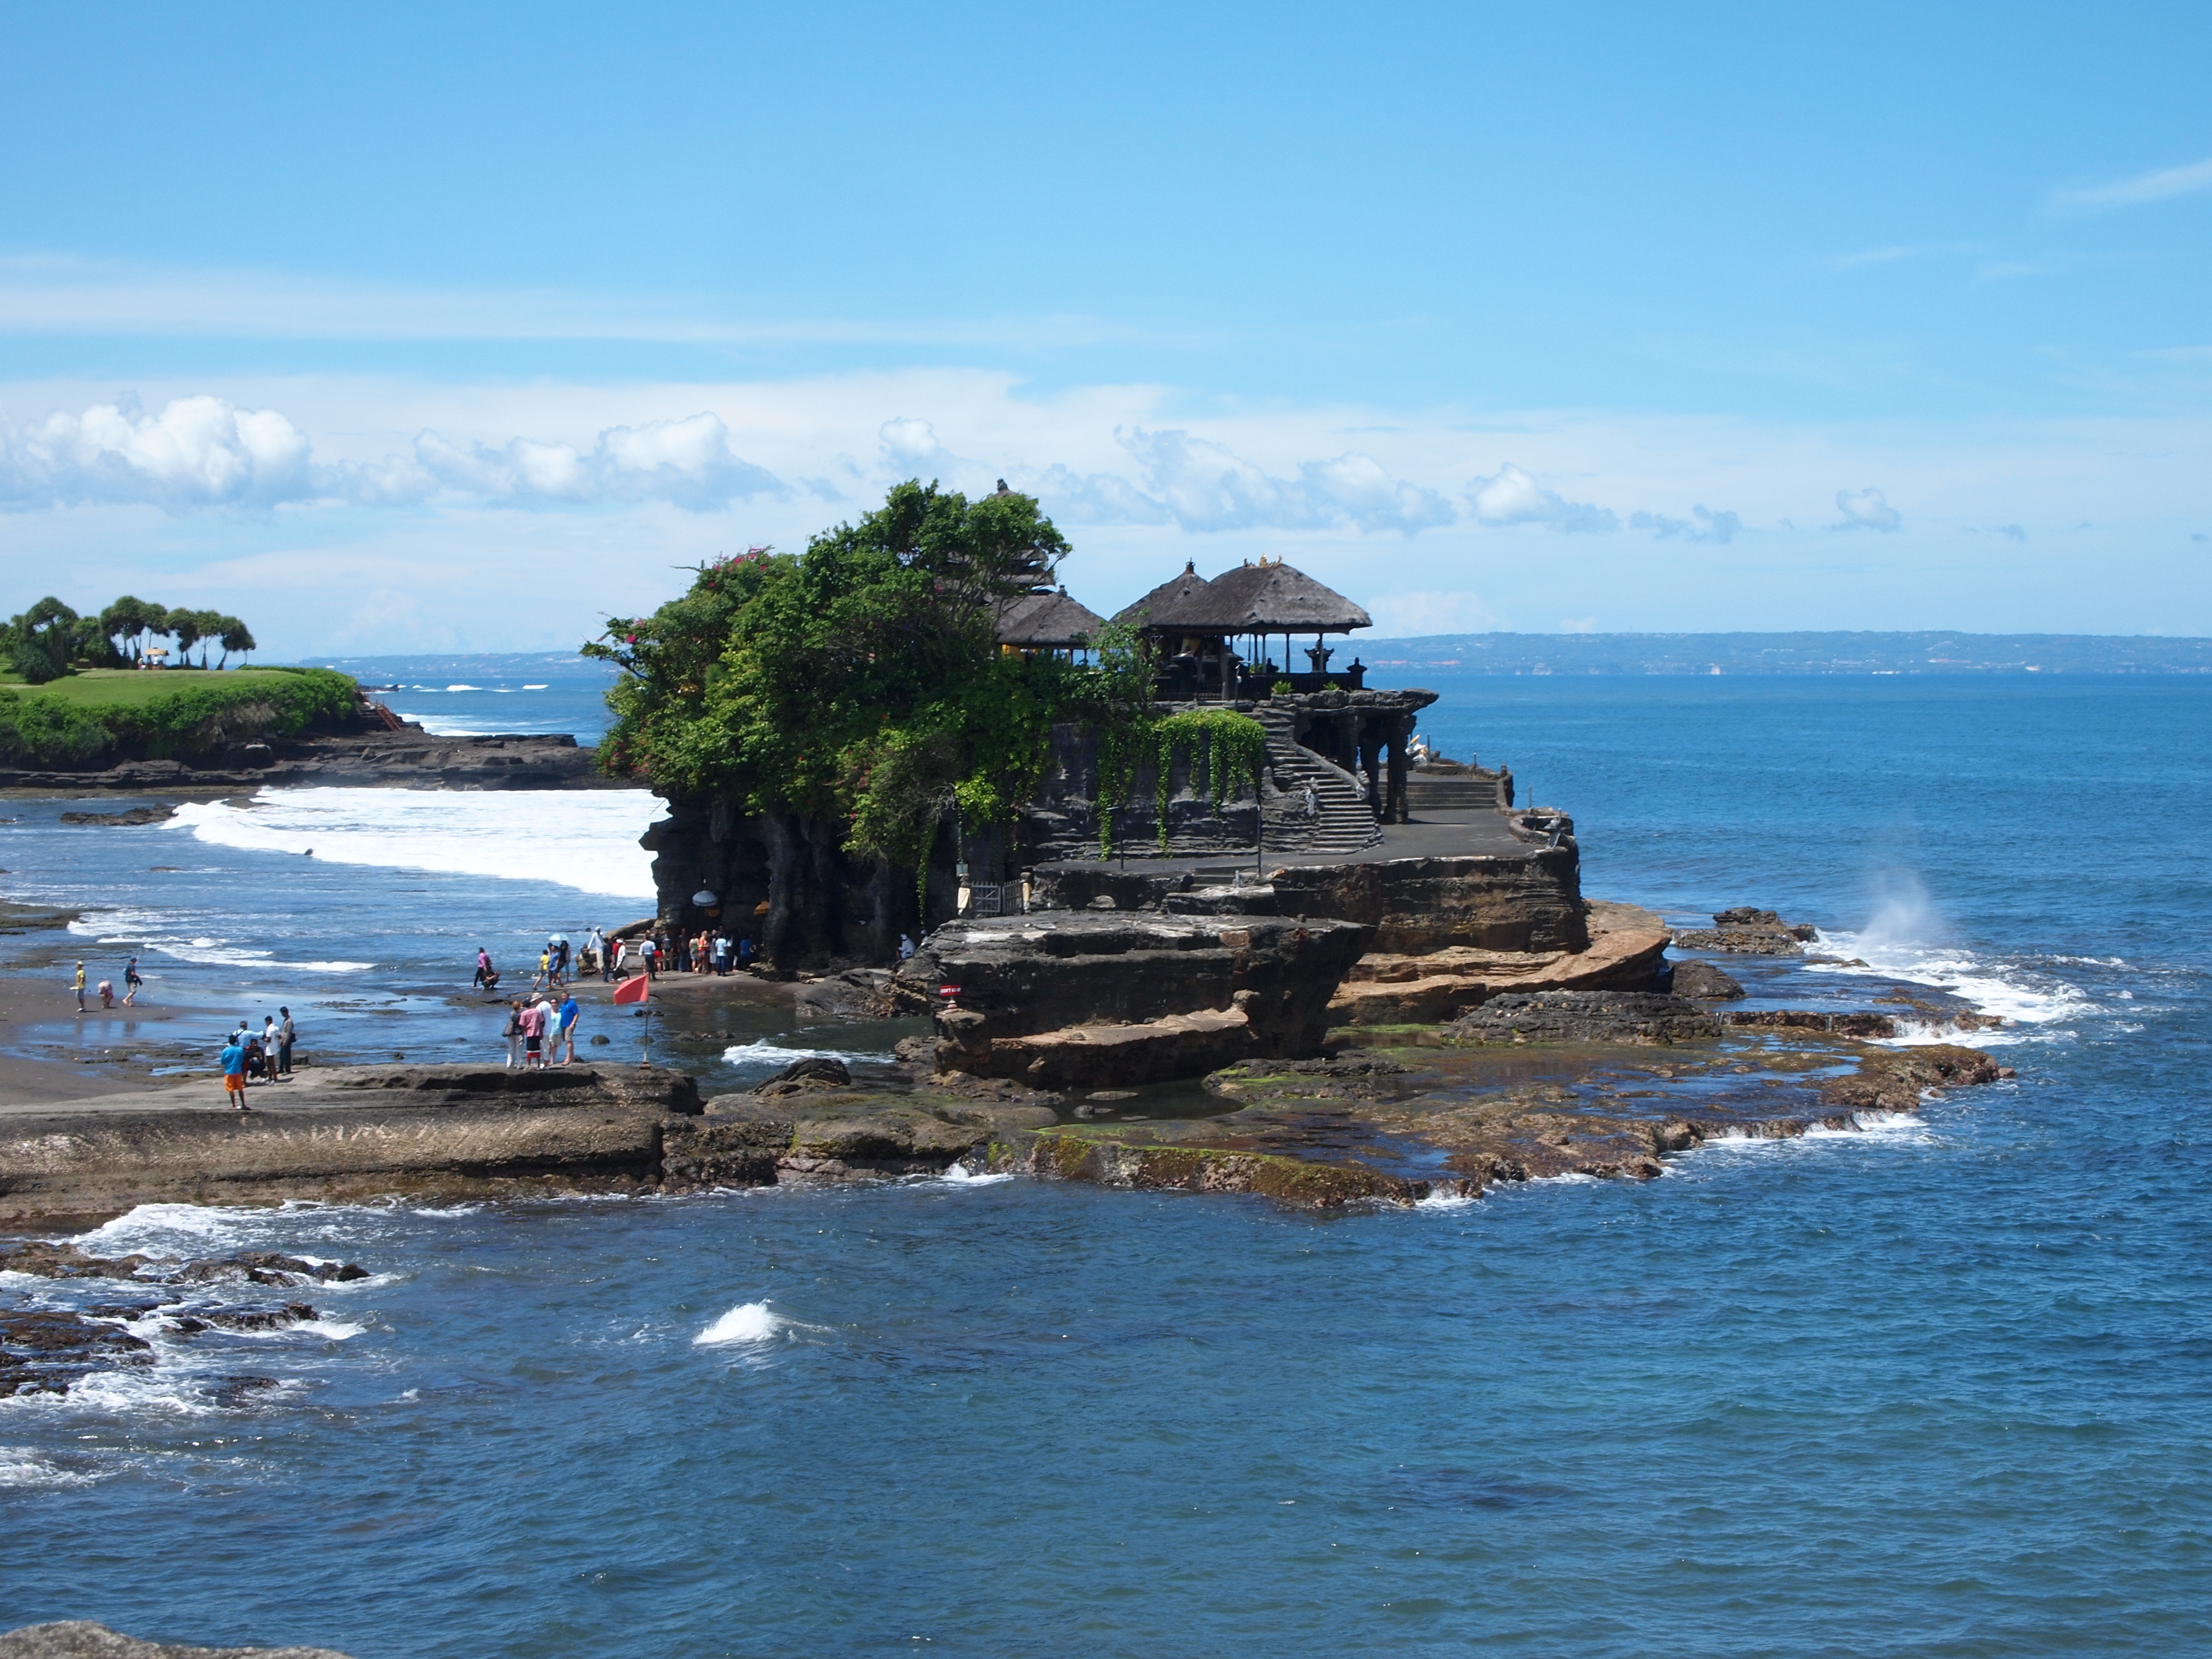  Tanah  Lot  Temple in Bali  Indonesia Well Known Places